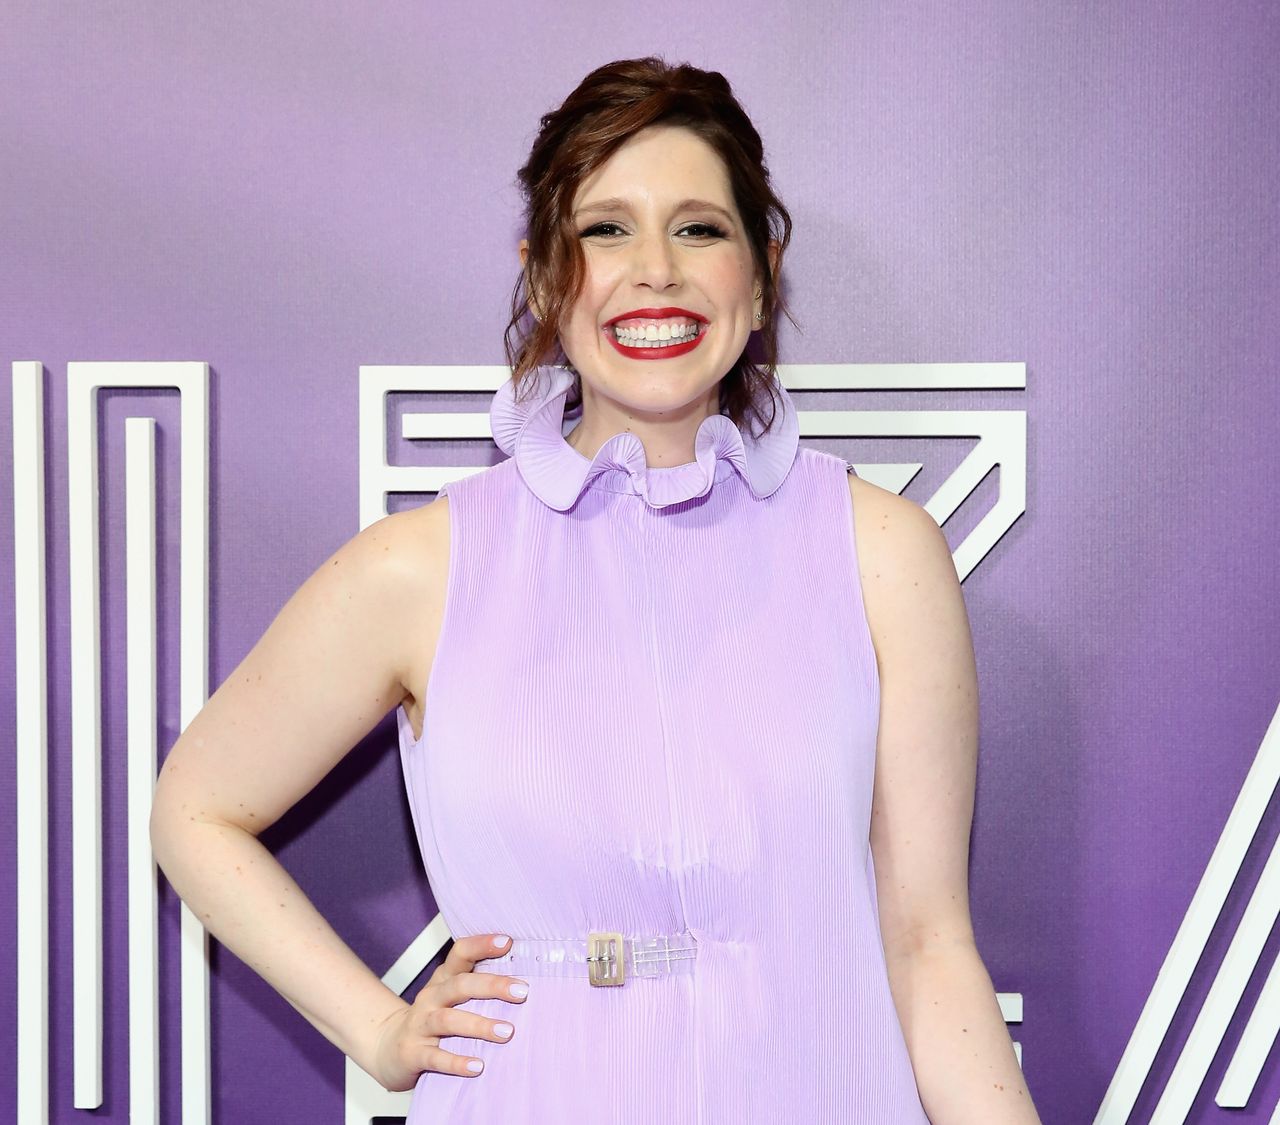 Vanessa Bayer attends the premiere of the Netflix film "Ibiza" last May in New York.